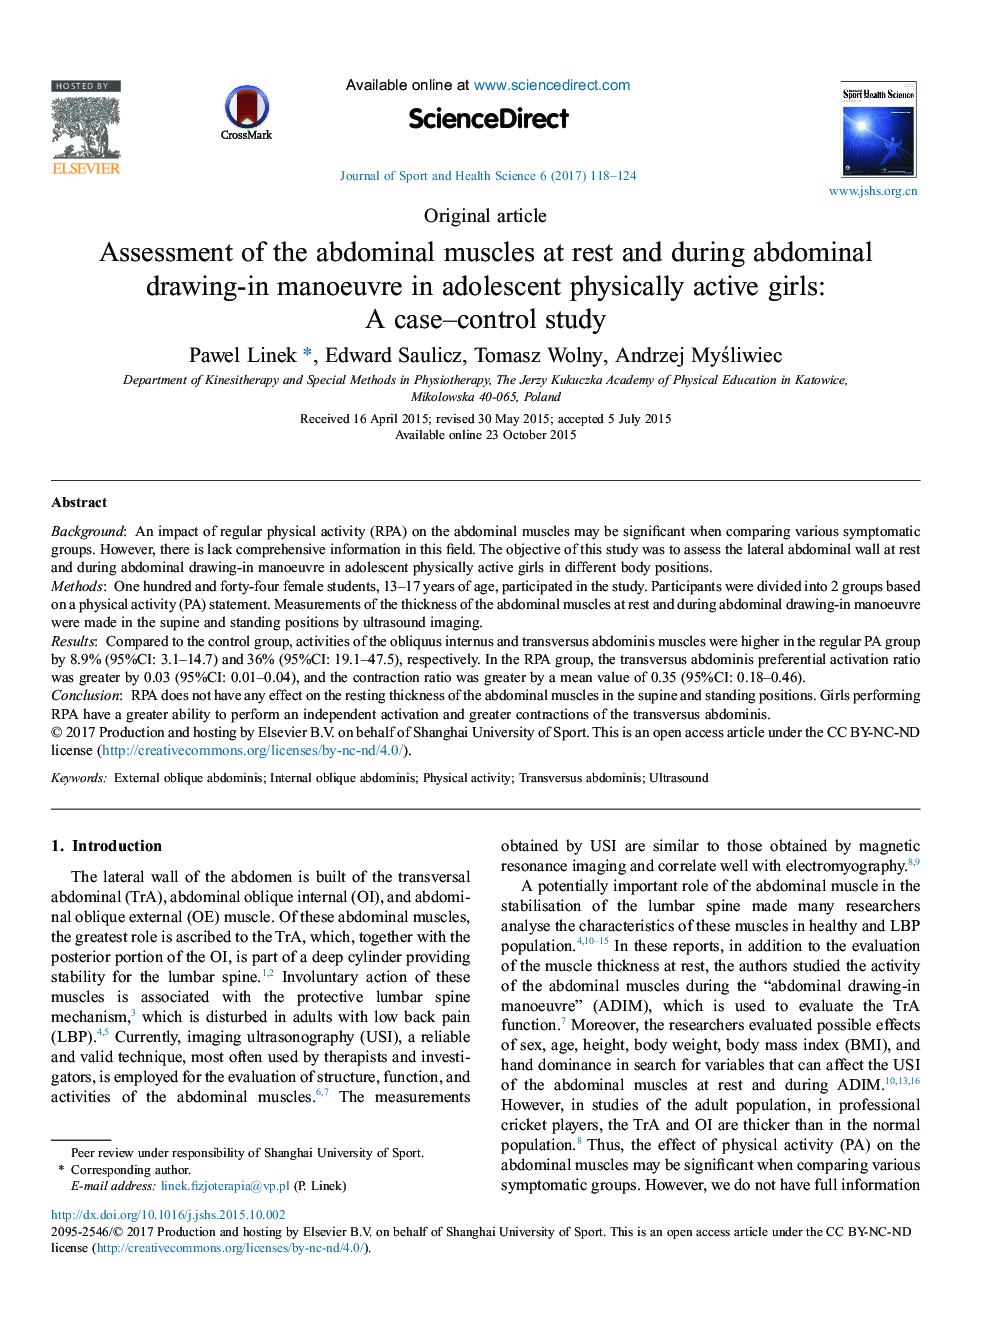 Assessment of the abdominal muscles at rest and during abdominal drawing-in manoeuvre in adolescent physically active girls: A case-control study